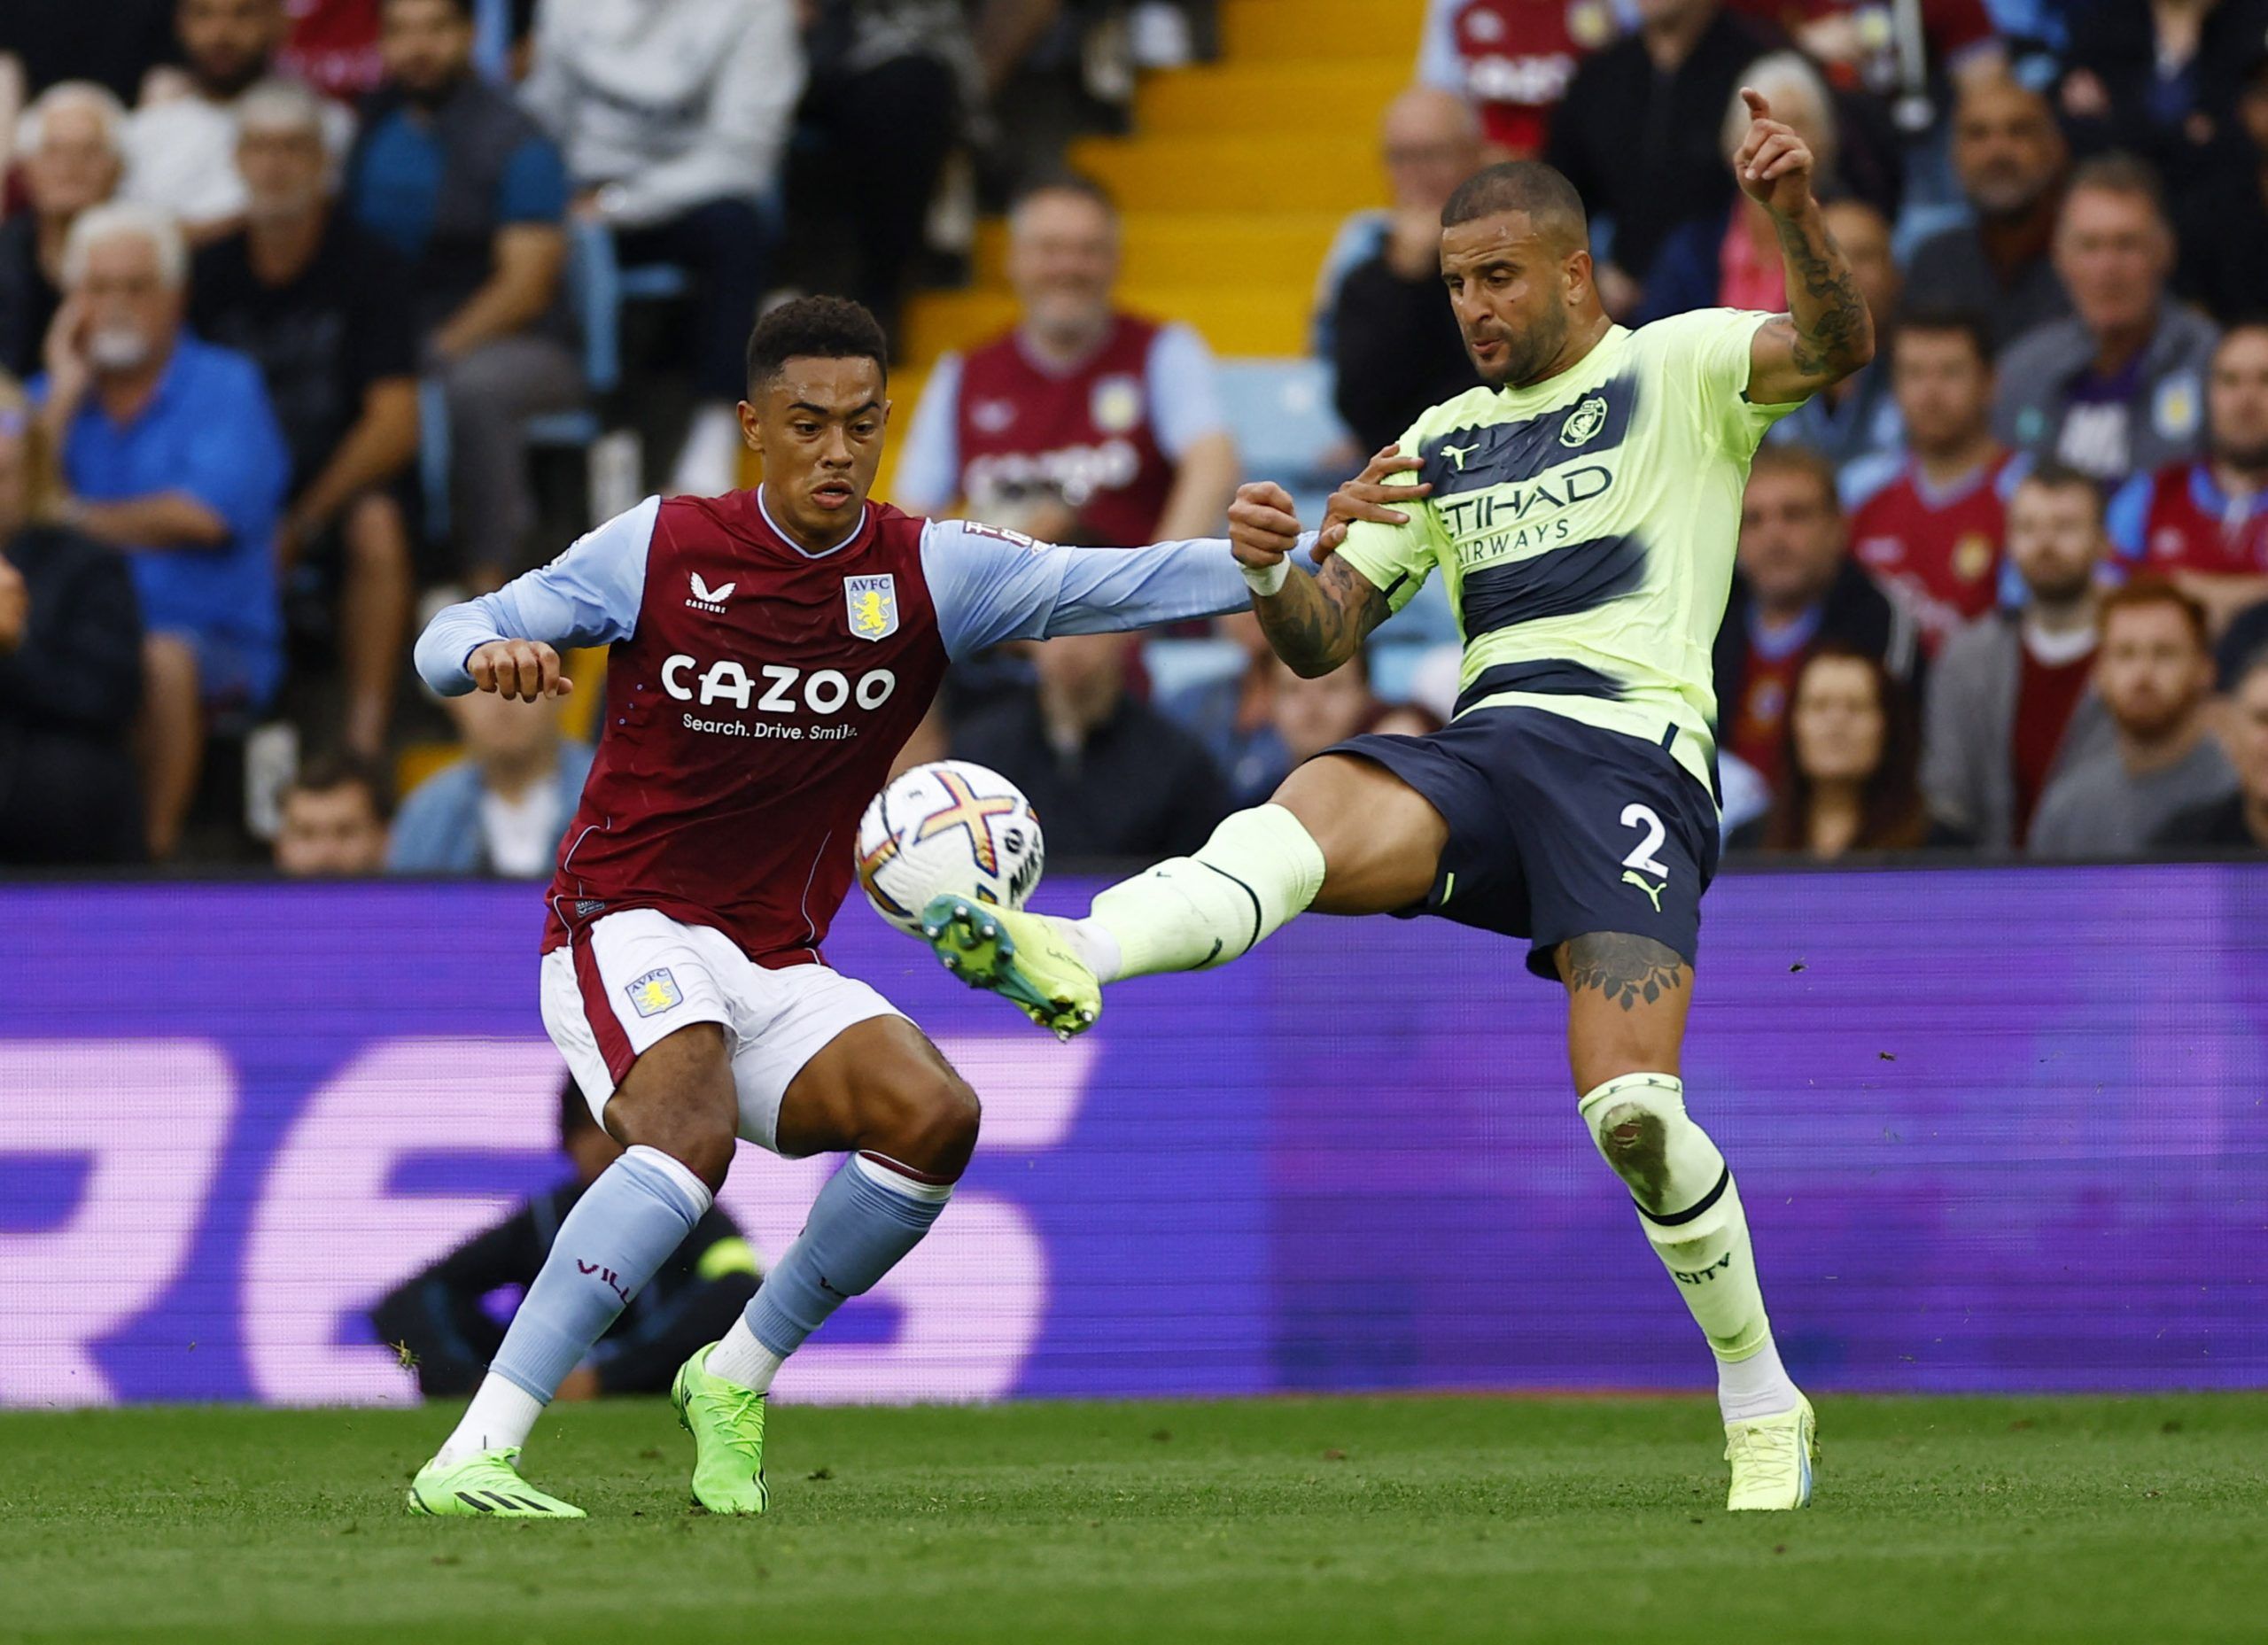 Soccer Football - Premier League - Aston Villa v Manchester City - Villa Park, Birmingham, Britain - September 3, 2022 Manchester City's Kyle Walker in action with Aston Villa's Jacob Ramsey Action Images via Reuters/Andrew Boyers EDITORIAL USE ONLY. No use with unauthorized audio, video, data, fixture lists, club/league logos or 'live' services. Online in-match use limited to 75 images, no video emulation. No use in betting, games or single club /league/player publications.  Please contact your